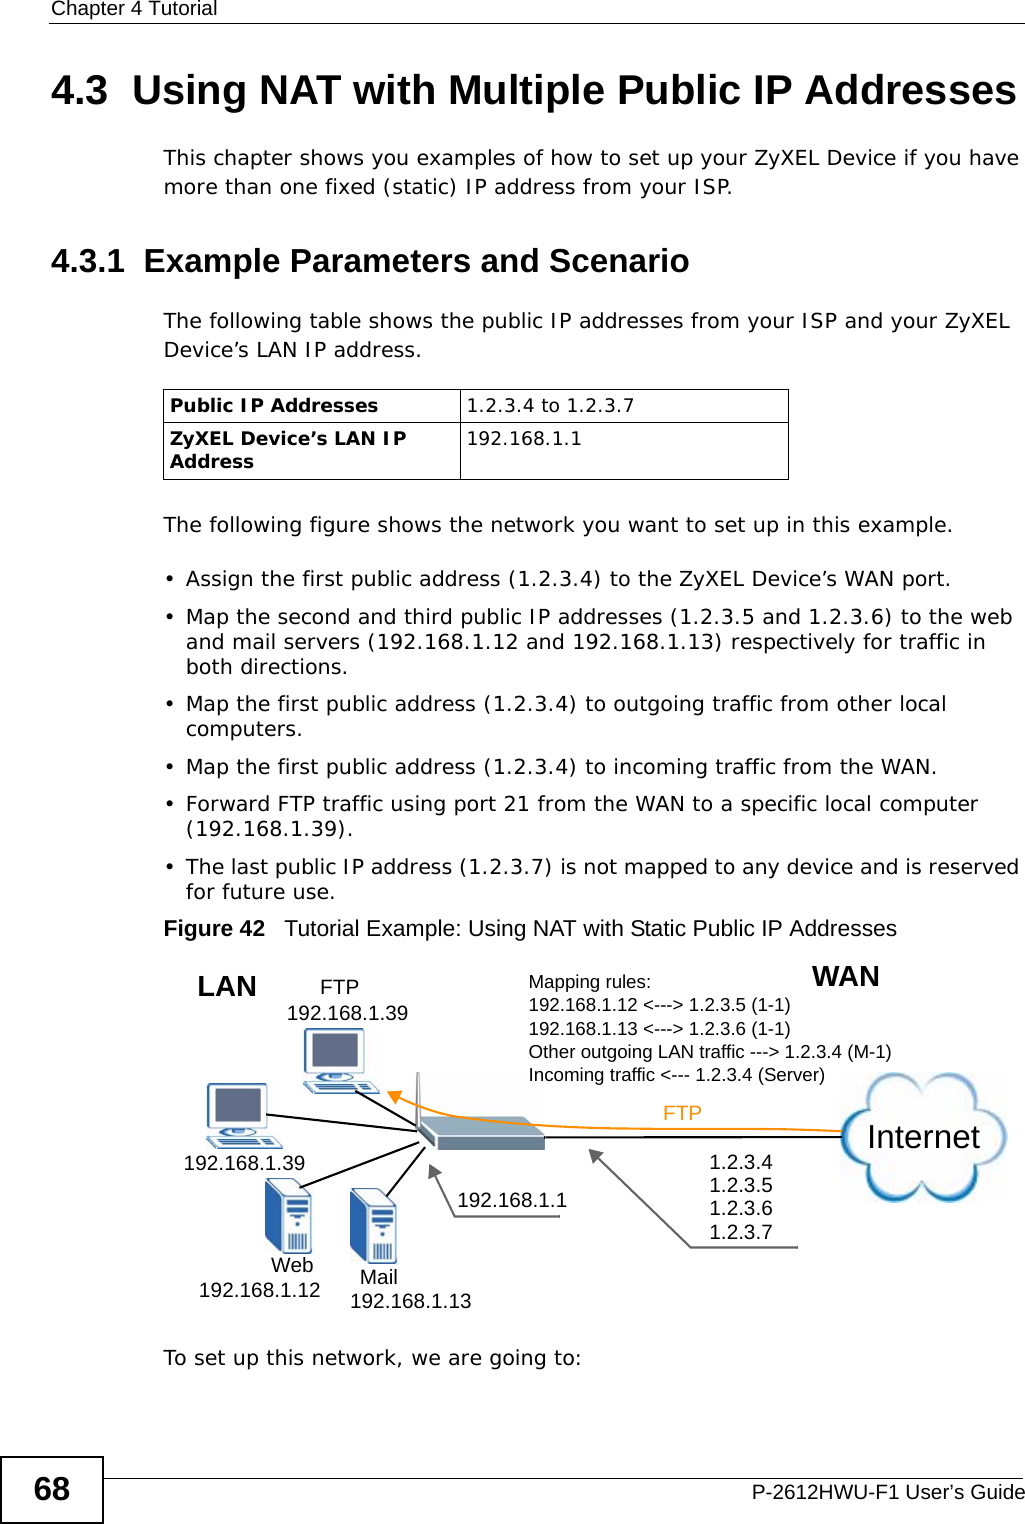 Chapter 4 TutorialP-2612HWU-F1 User’s Guide684.3  Using NAT with Multiple Public IP AddressesThis chapter shows you examples of how to set up your ZyXEL Device if you have more than one fixed (static) IP address from your ISP. 4.3.1  Example Parameters and ScenarioThe following table shows the public IP addresses from your ISP and your ZyXEL Device’s LAN IP address.  The following figure shows the network you want to set up in this example. • Assign the first public address (1.2.3.4) to the ZyXEL Device’s WAN port.• Map the second and third public IP addresses (1.2.3.5 and 1.2.3.6) to the web and mail servers (192.168.1.12 and 192.168.1.13) respectively for traffic in both directions.• Map the first public address (1.2.3.4) to outgoing traffic from other local computers.• Map the first public address (1.2.3.4) to incoming traffic from the WAN.• Forward FTP traffic using port 21 from the WAN to a specific local computer (192.168.1.39).• The last public IP address (1.2.3.7) is not mapped to any device and is reserved for future use.Figure 42   Tutorial Example: Using NAT with Static Public IP AddressesTo set up this network, we are going to:Public IP Addresses 1.2.3.4 to 1.2.3.7ZyXEL Device’s LAN IP Address 192.168.1.1InternetFTPFTP 192.168.1.39192.168.1.39192.168.1.12 192.168.1.13MailWeb192.168.1.11.2.3.41.2.3.51.2.3.61.2.3.7WANLAN Mapping rules:192.168.1.12 &lt;---&gt; 1.2.3.5 (1-1)192.168.1.13 &lt;---&gt; 1.2.3.6 (1-1)Other outgoing LAN traffic ---&gt; 1.2.3.4 (M-1)Incoming traffic &lt;--- 1.2.3.4 (Server)